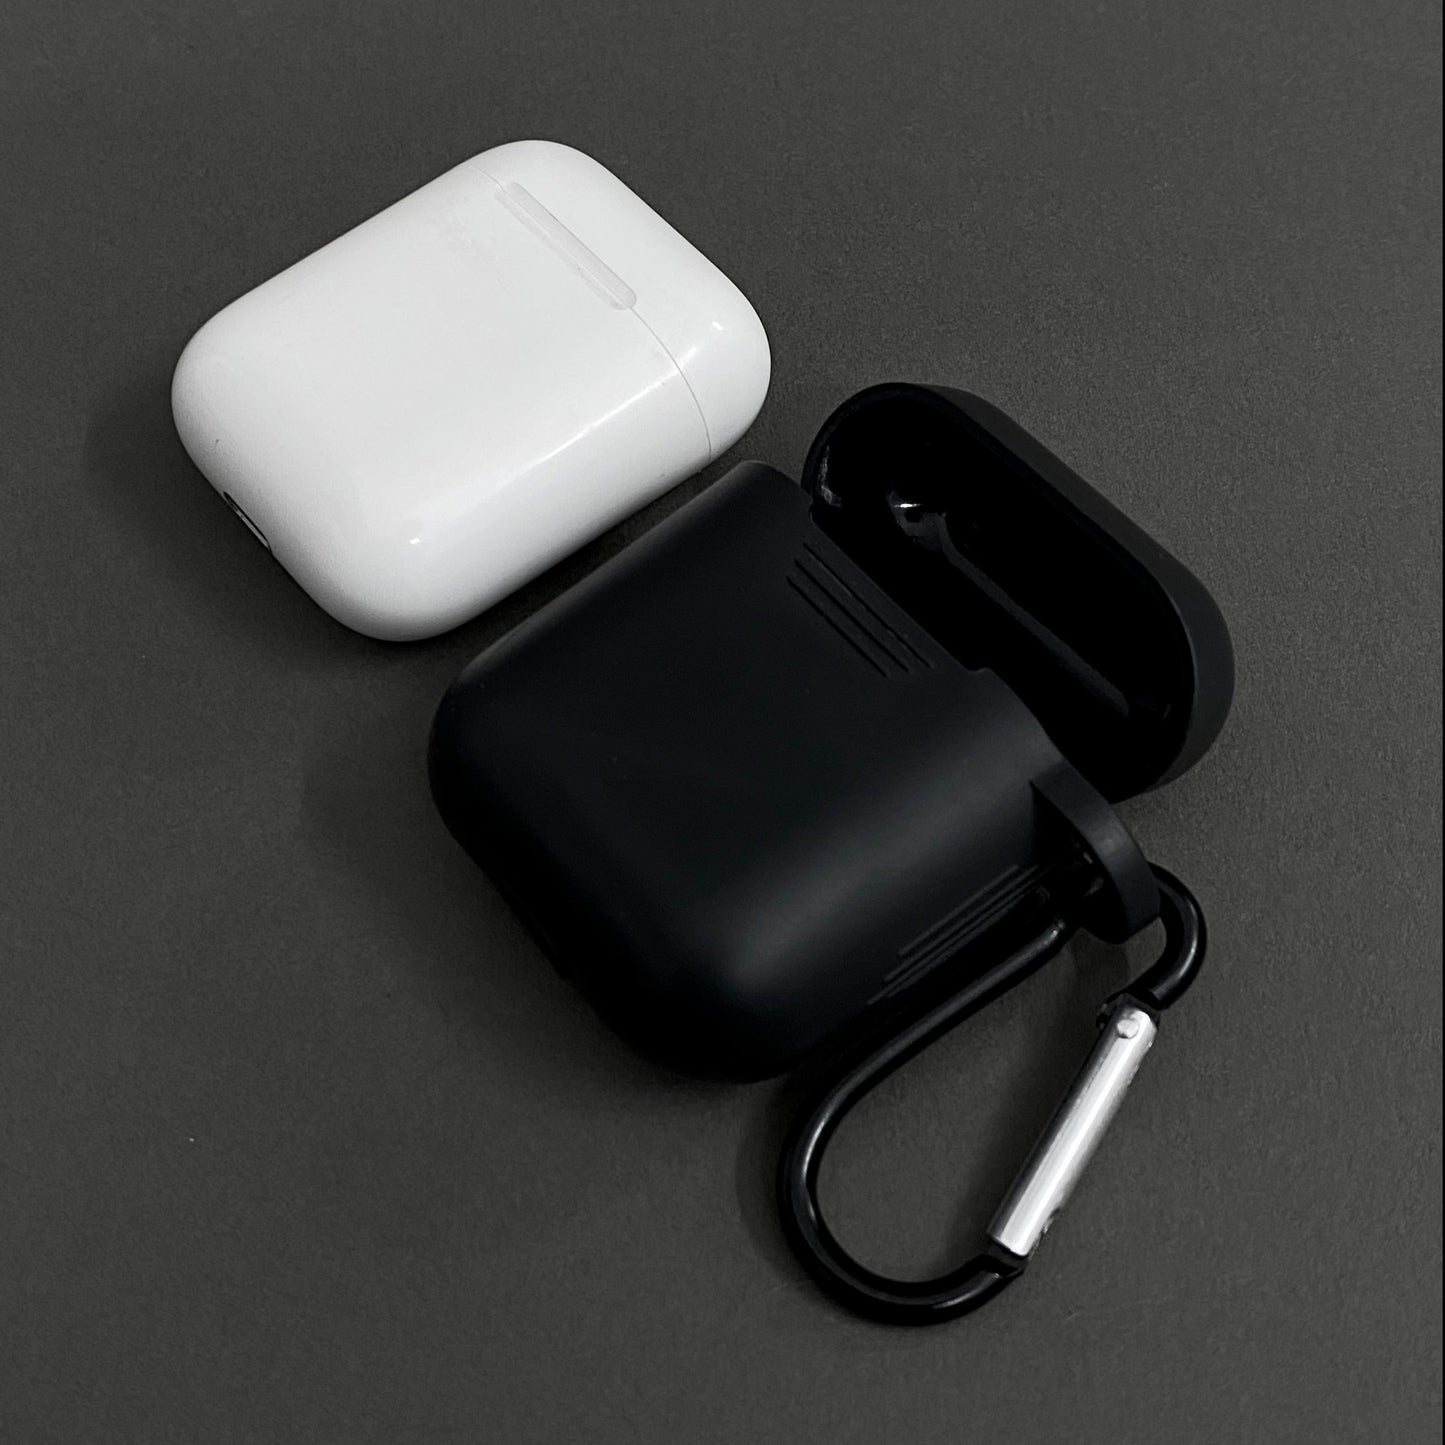 The Black Apple Airpods Case